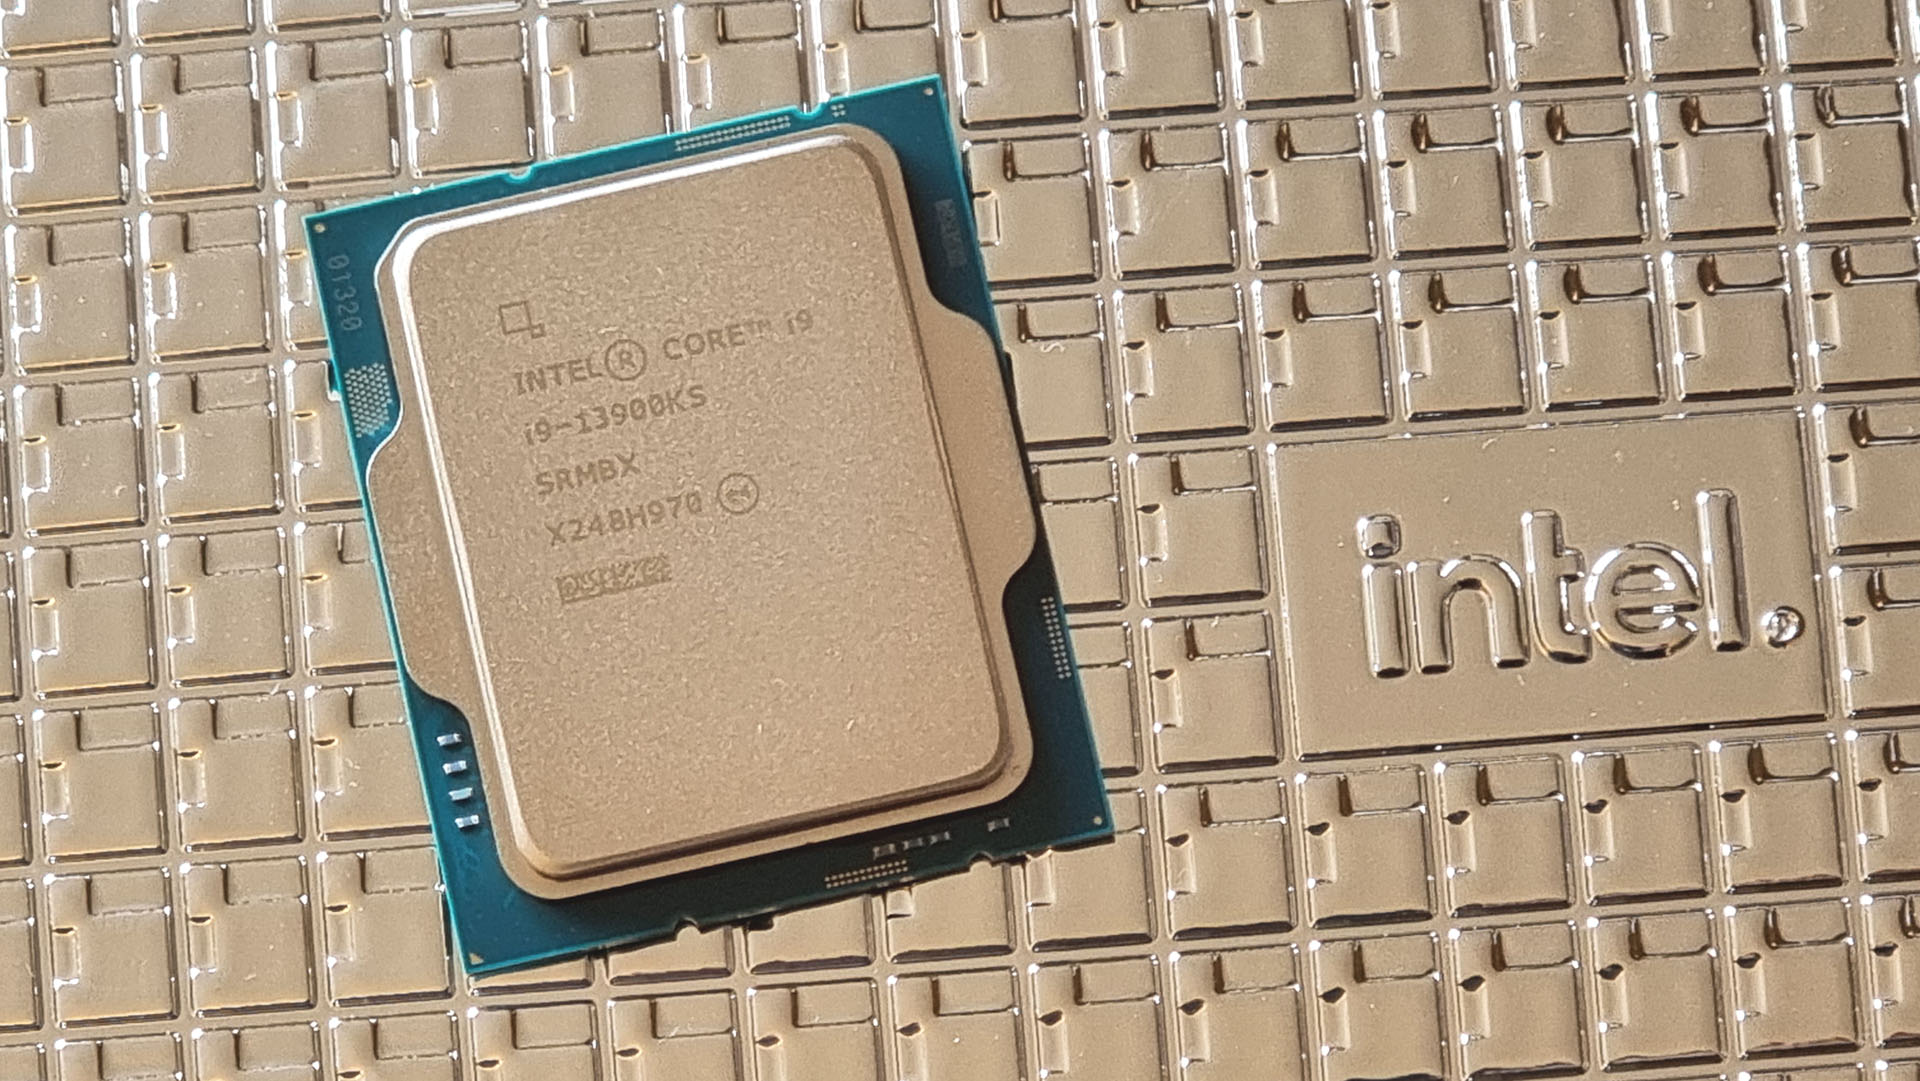 Conclusion - The Intel Core i9-13900KS Review: Taking Intel's